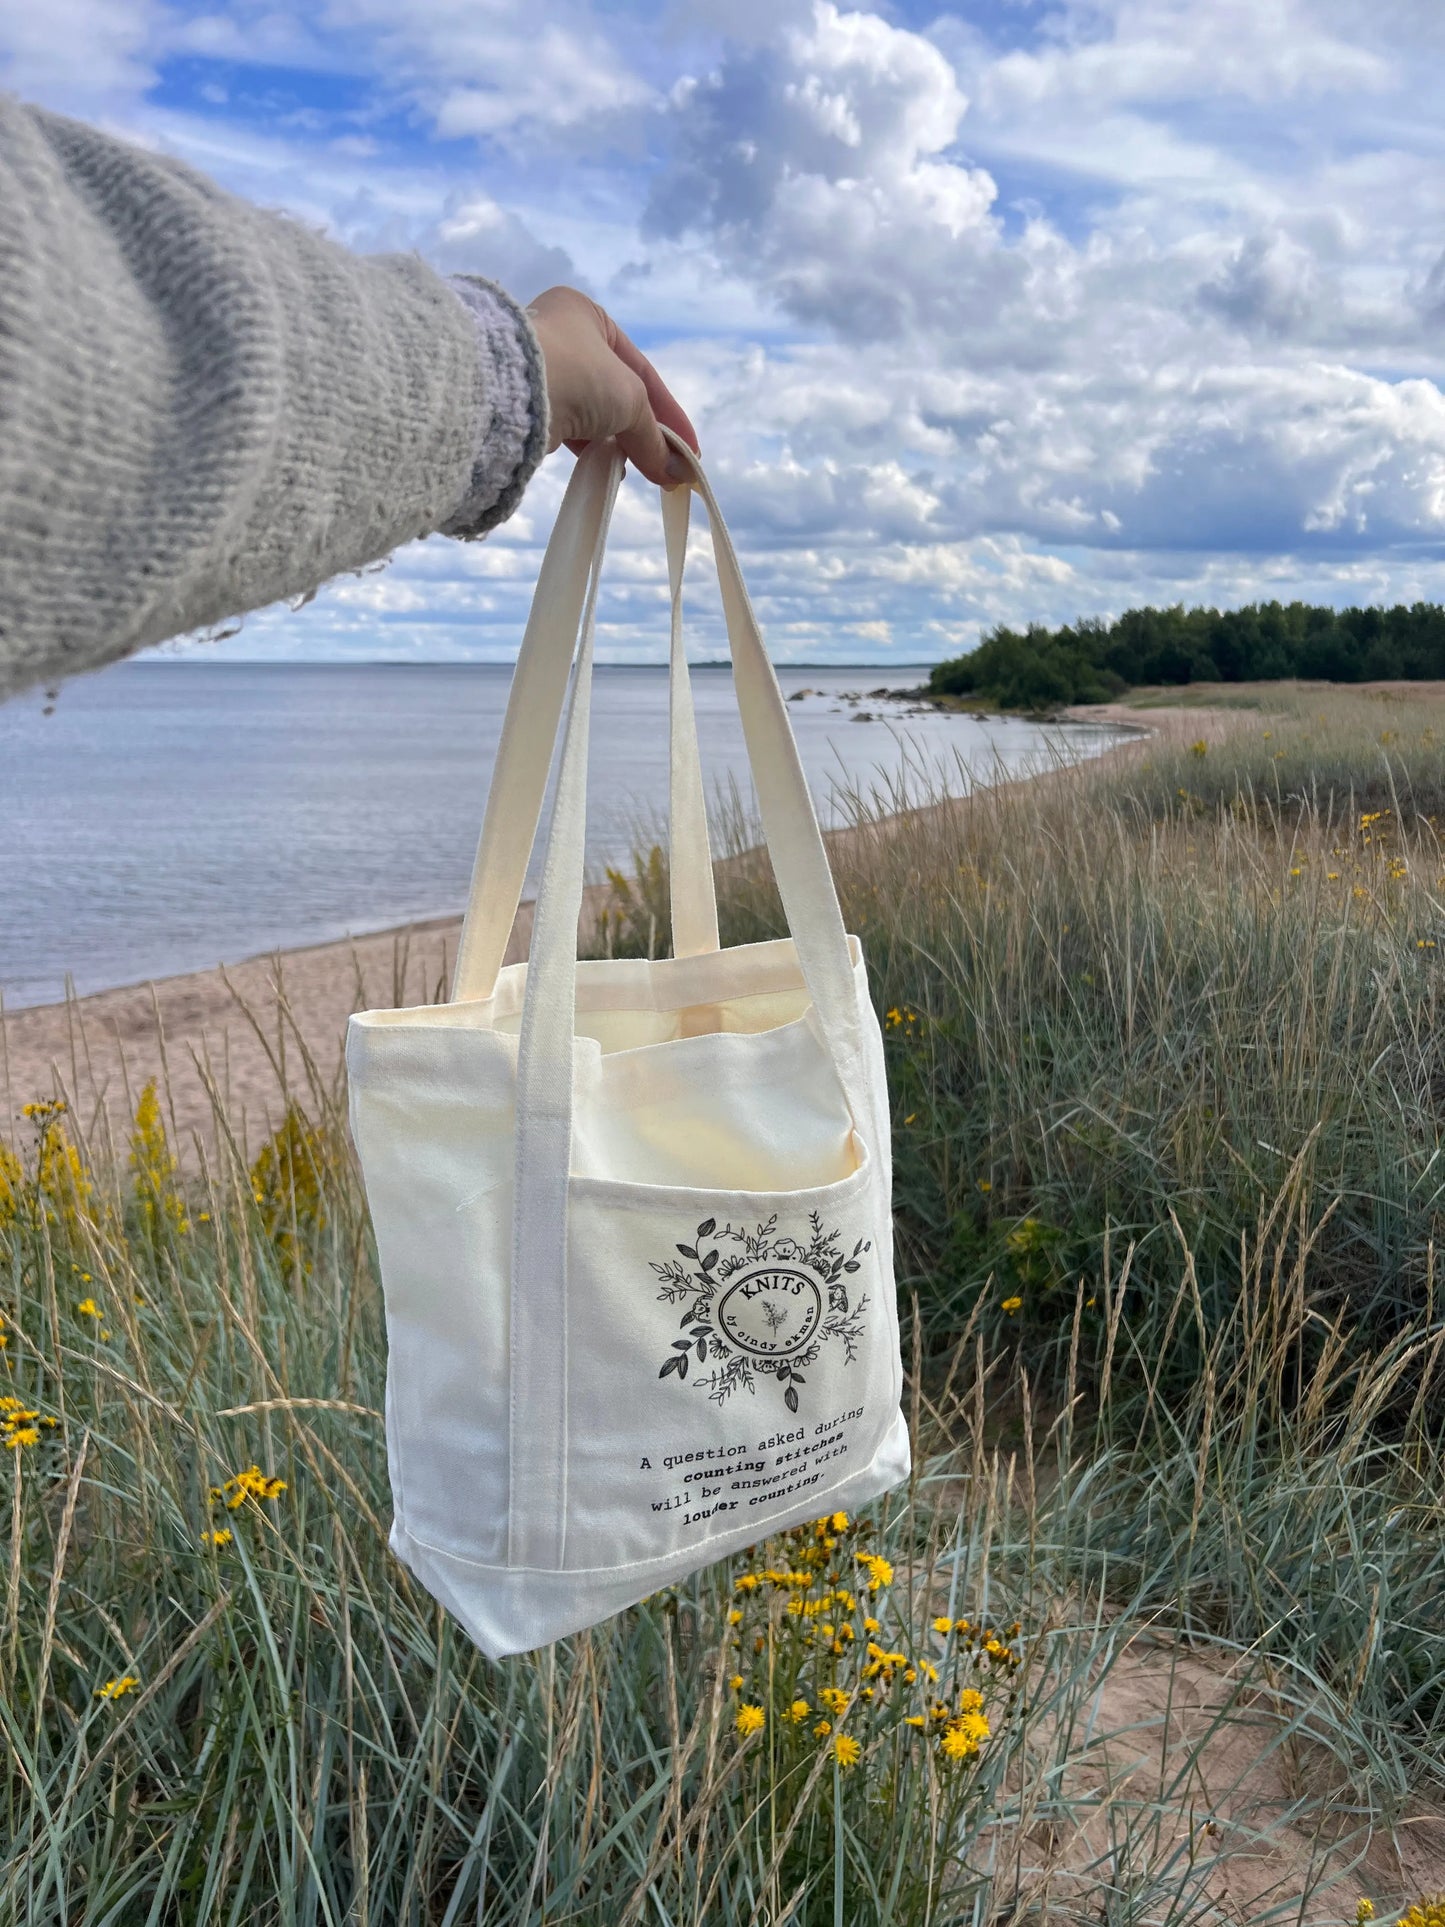 The KNITS tote bag